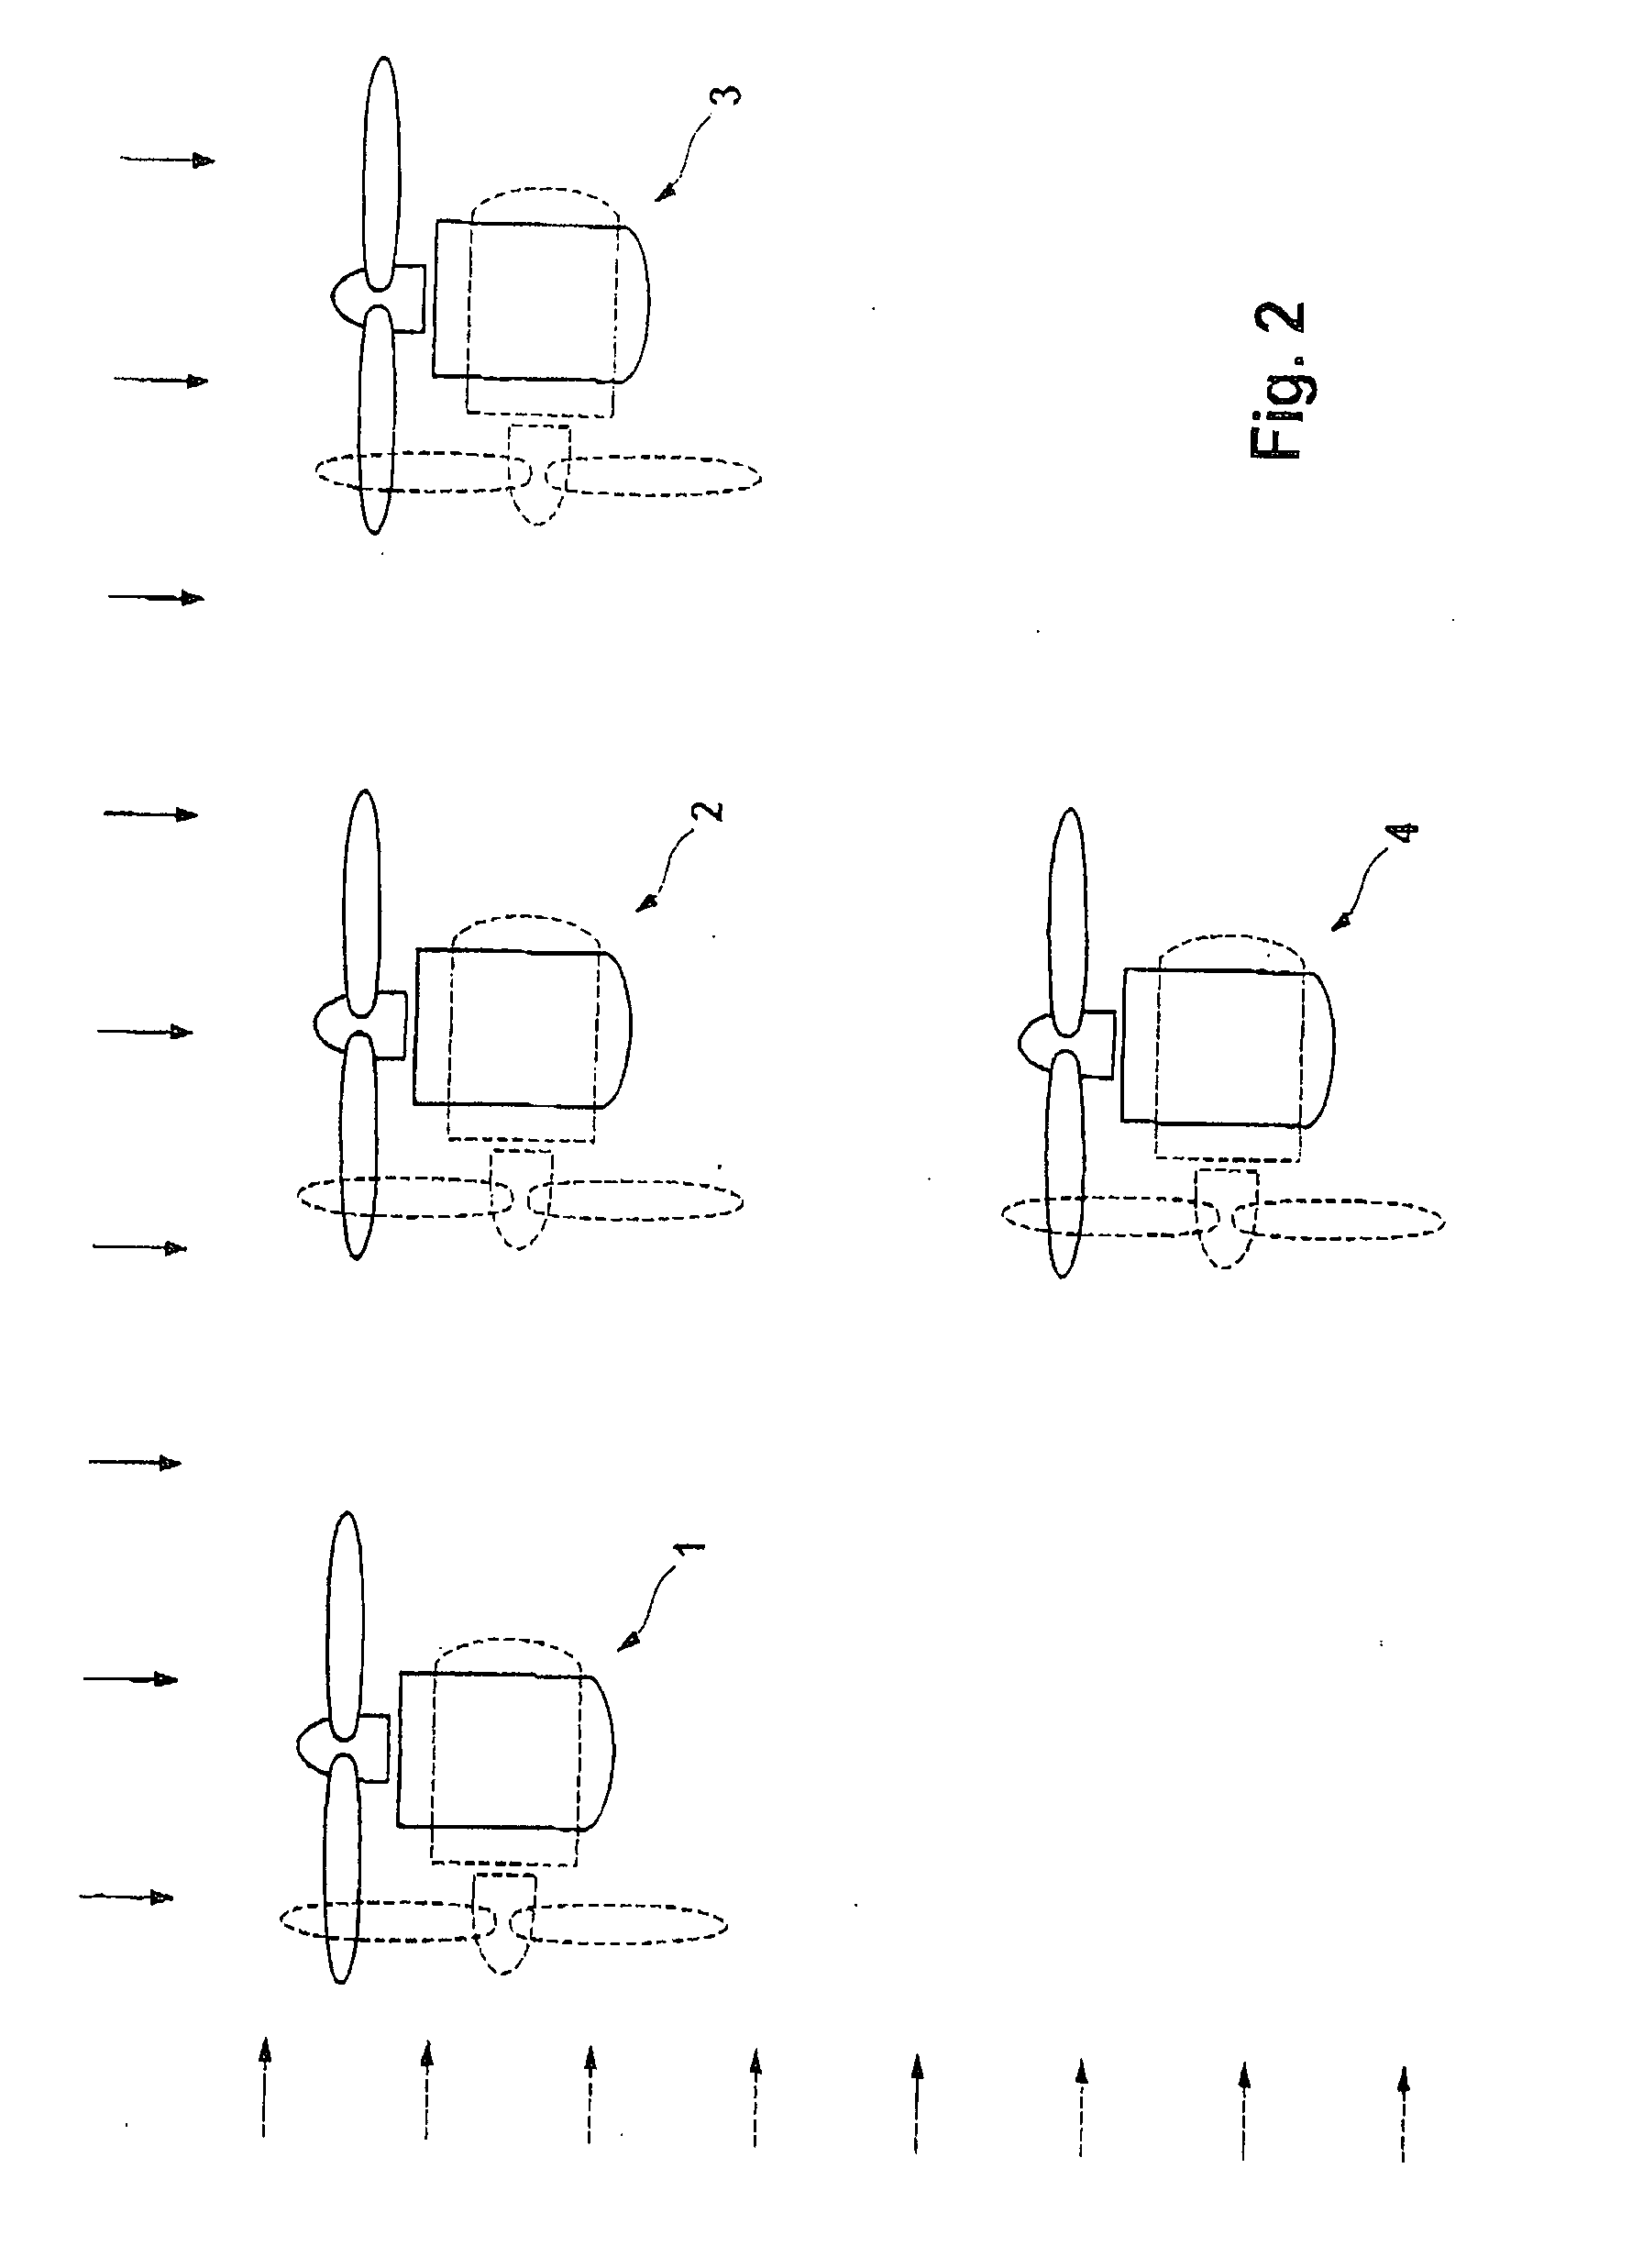 Method for Optimizing the Operation of Wind Farms